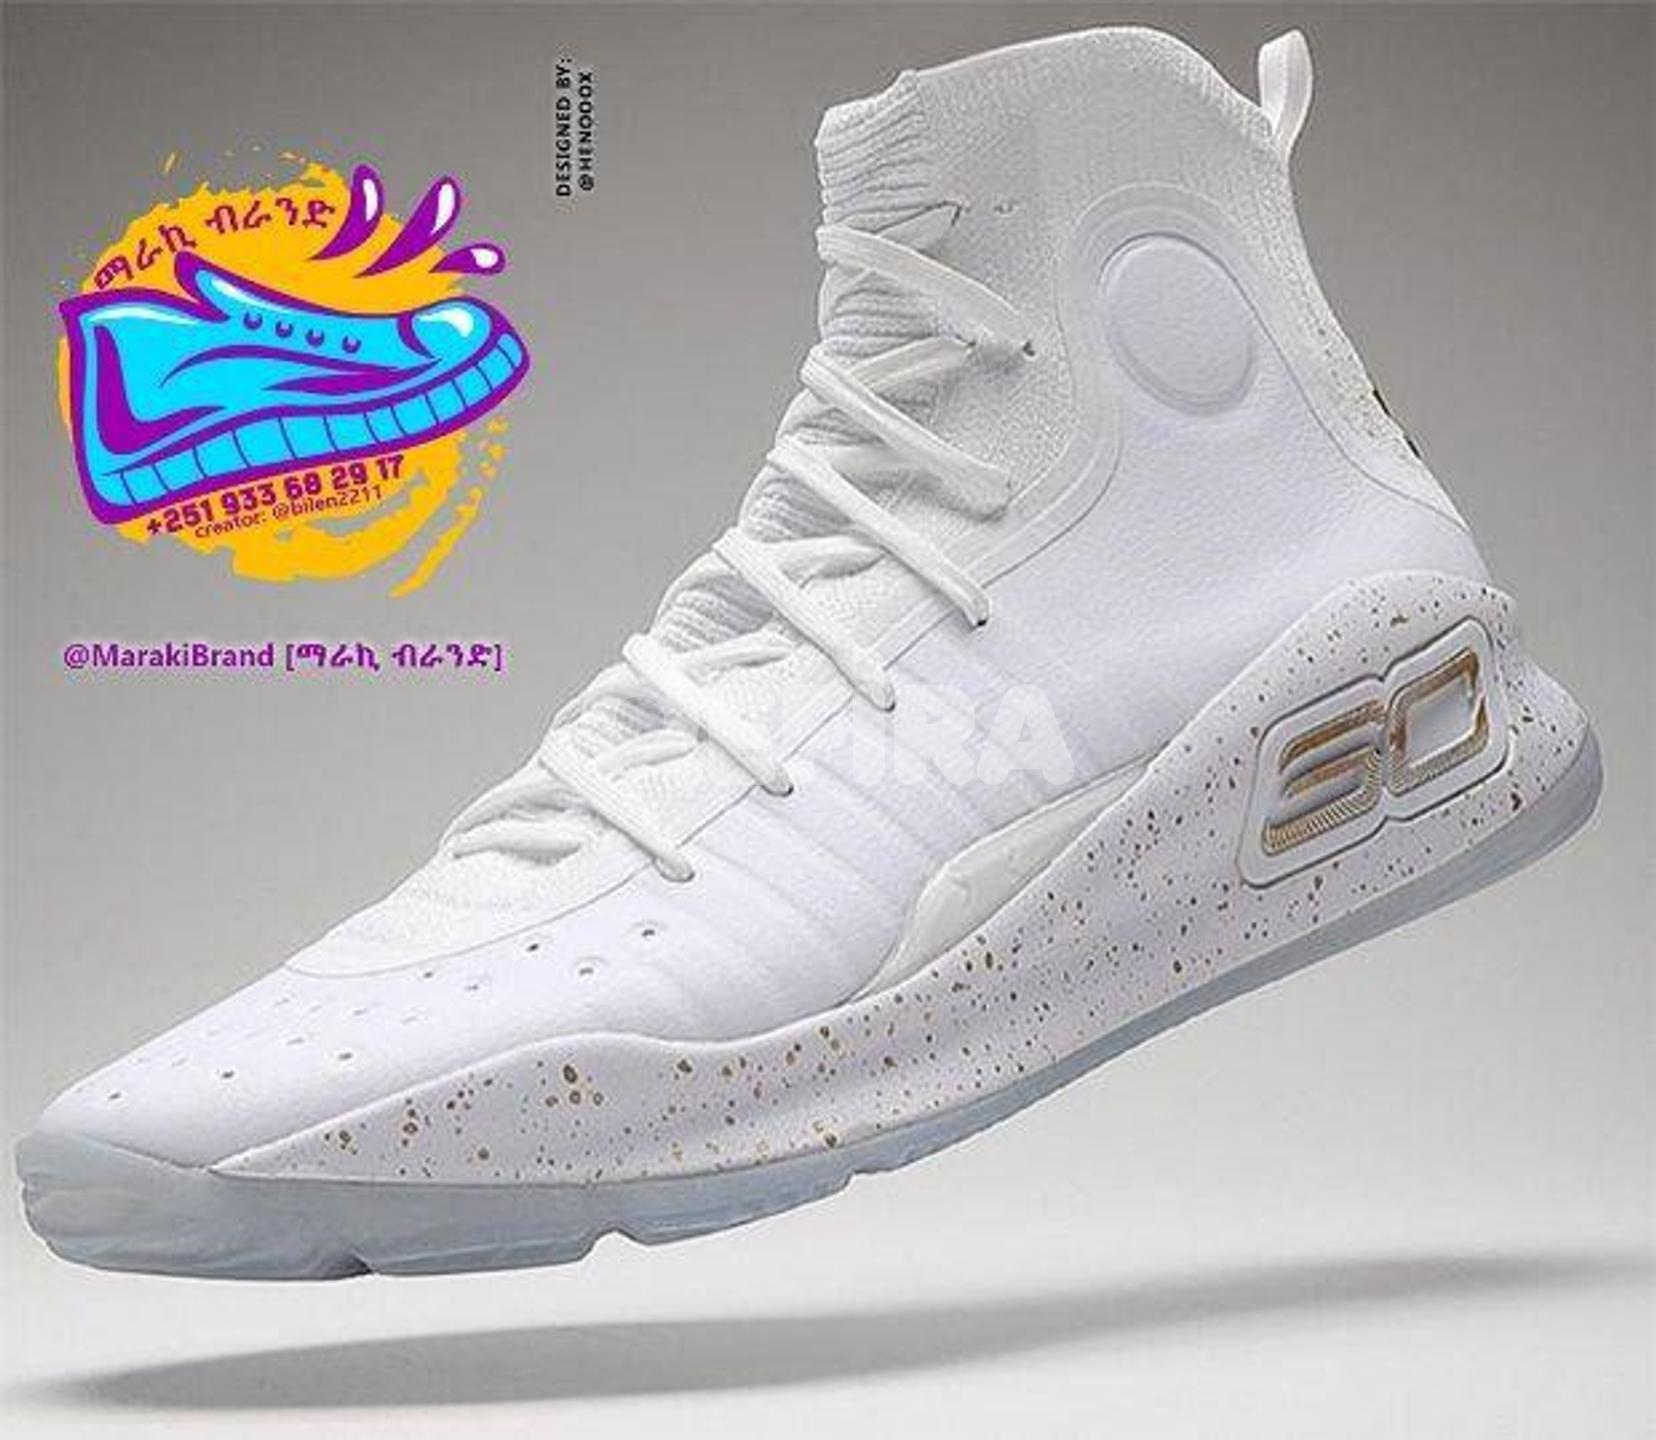 Under Armour Curry 4 Men's Shoe in 